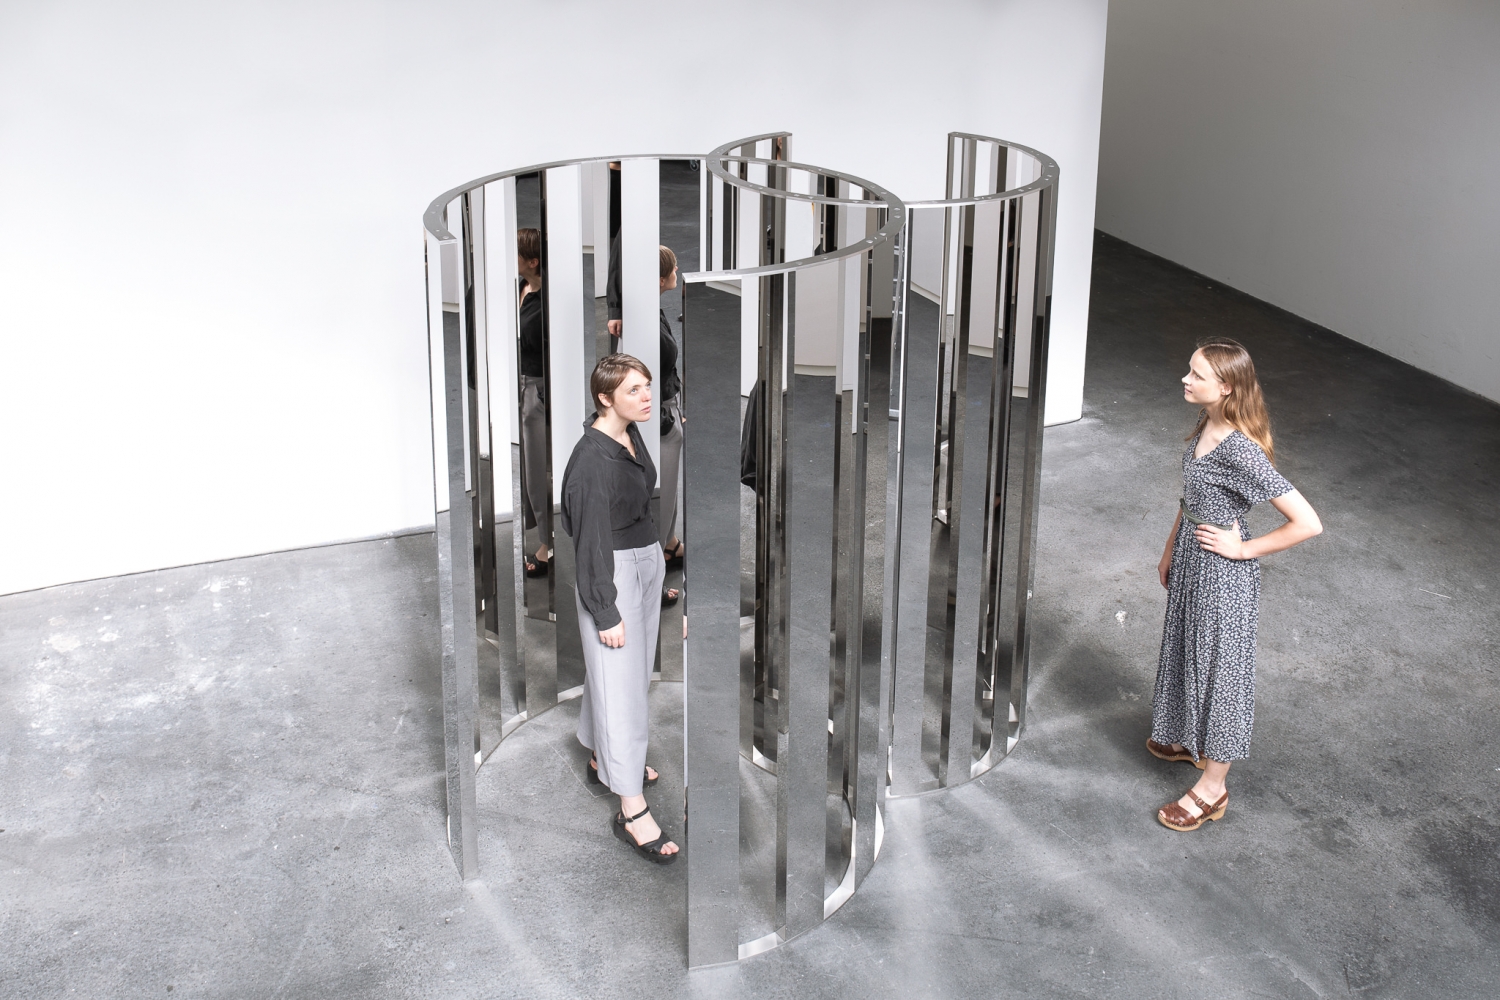 Jeppe Hein

Intersecting Circles

2019

High polished stainless steel

87 3/8 x 85 x 70 inches (222 x 216 x 178 cm)

Edition&amp;nbsp;of 3, with 2 AP

JH 525

&amp;nbsp;

INQUIRE